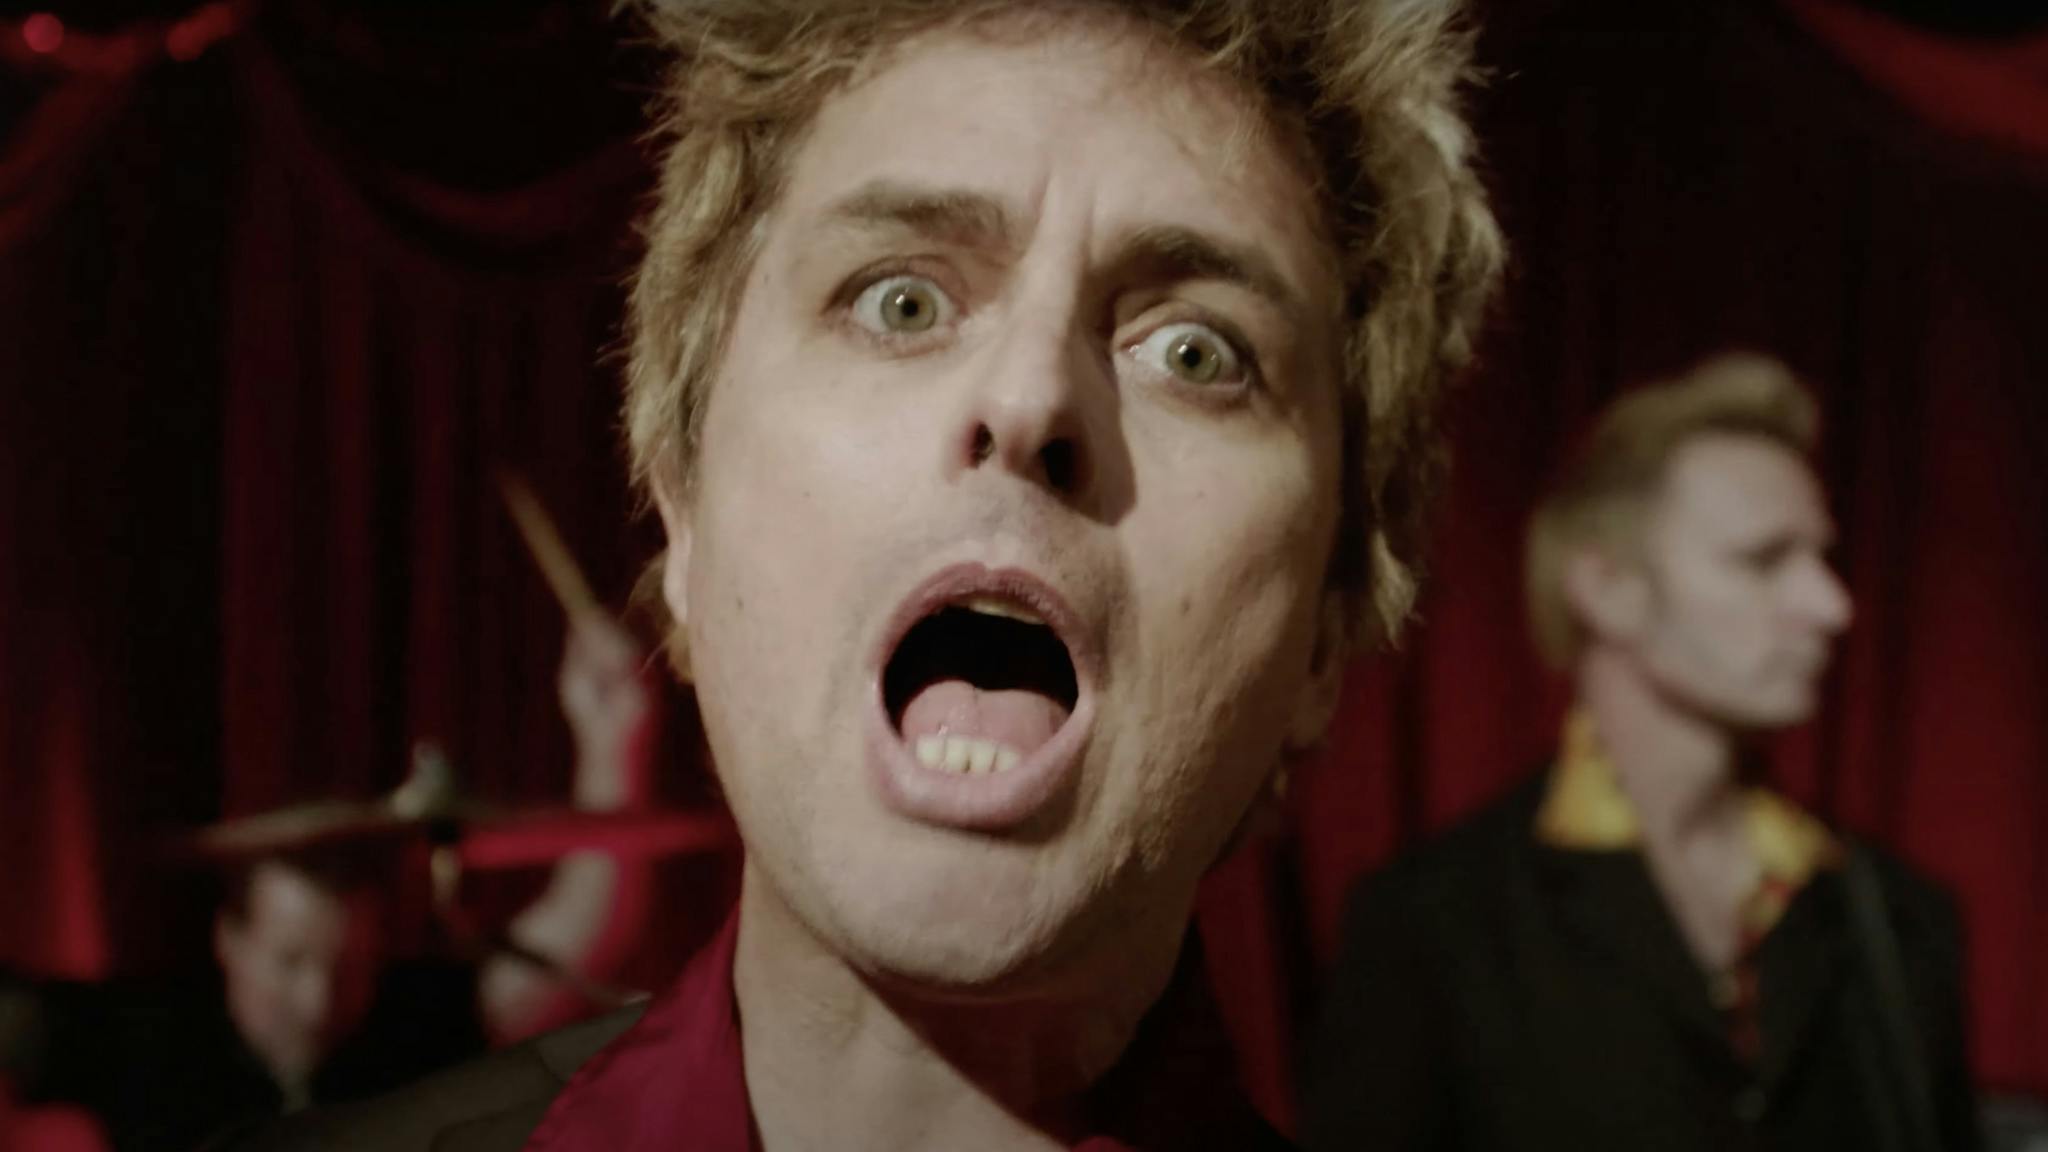 Green Day have shared a personal new single, Dilemma